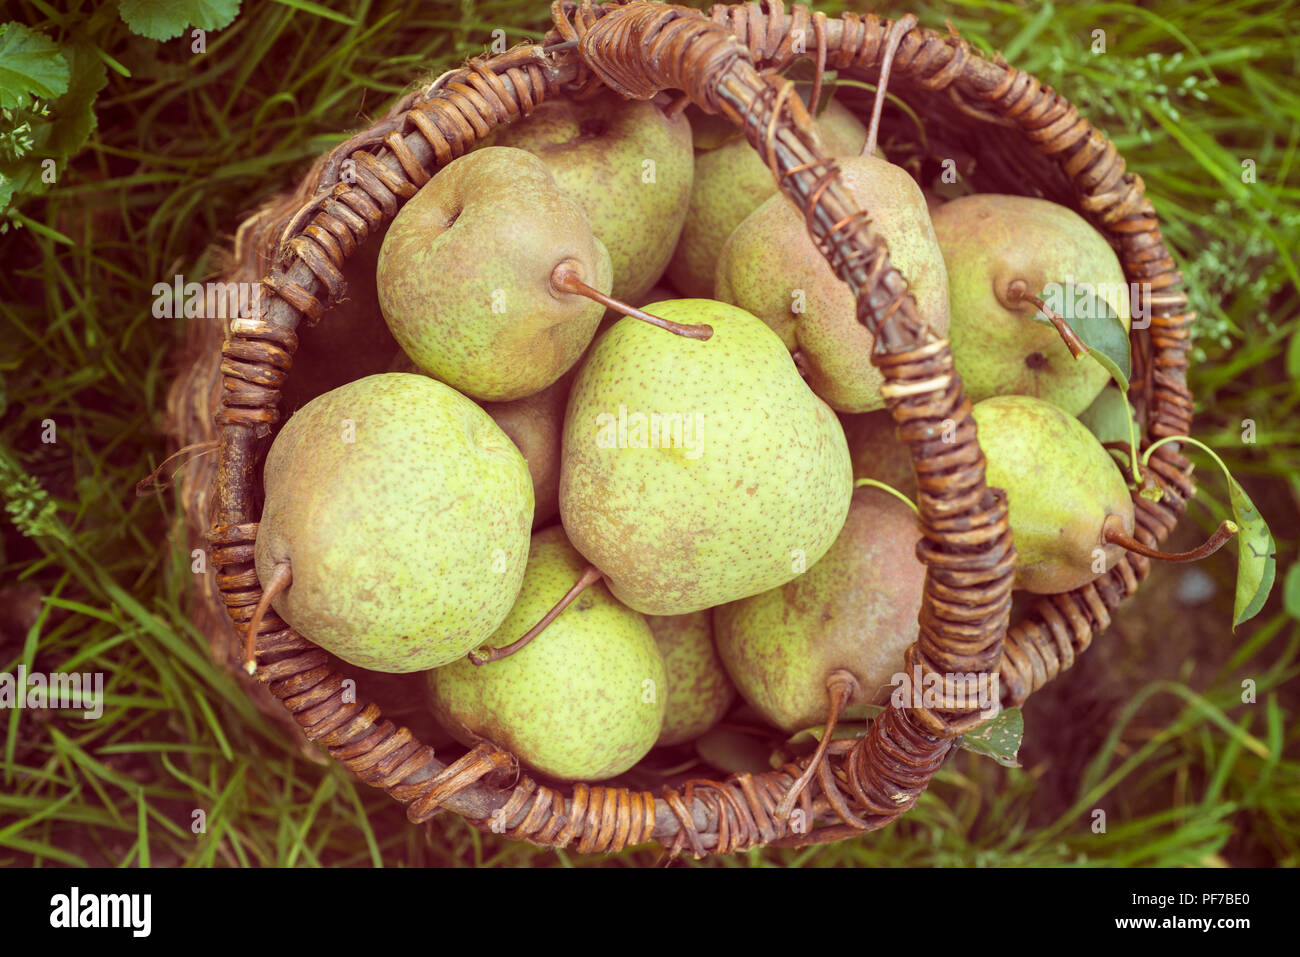 many big ripe pears in vintage wooden basket outdoor, Stock Photo